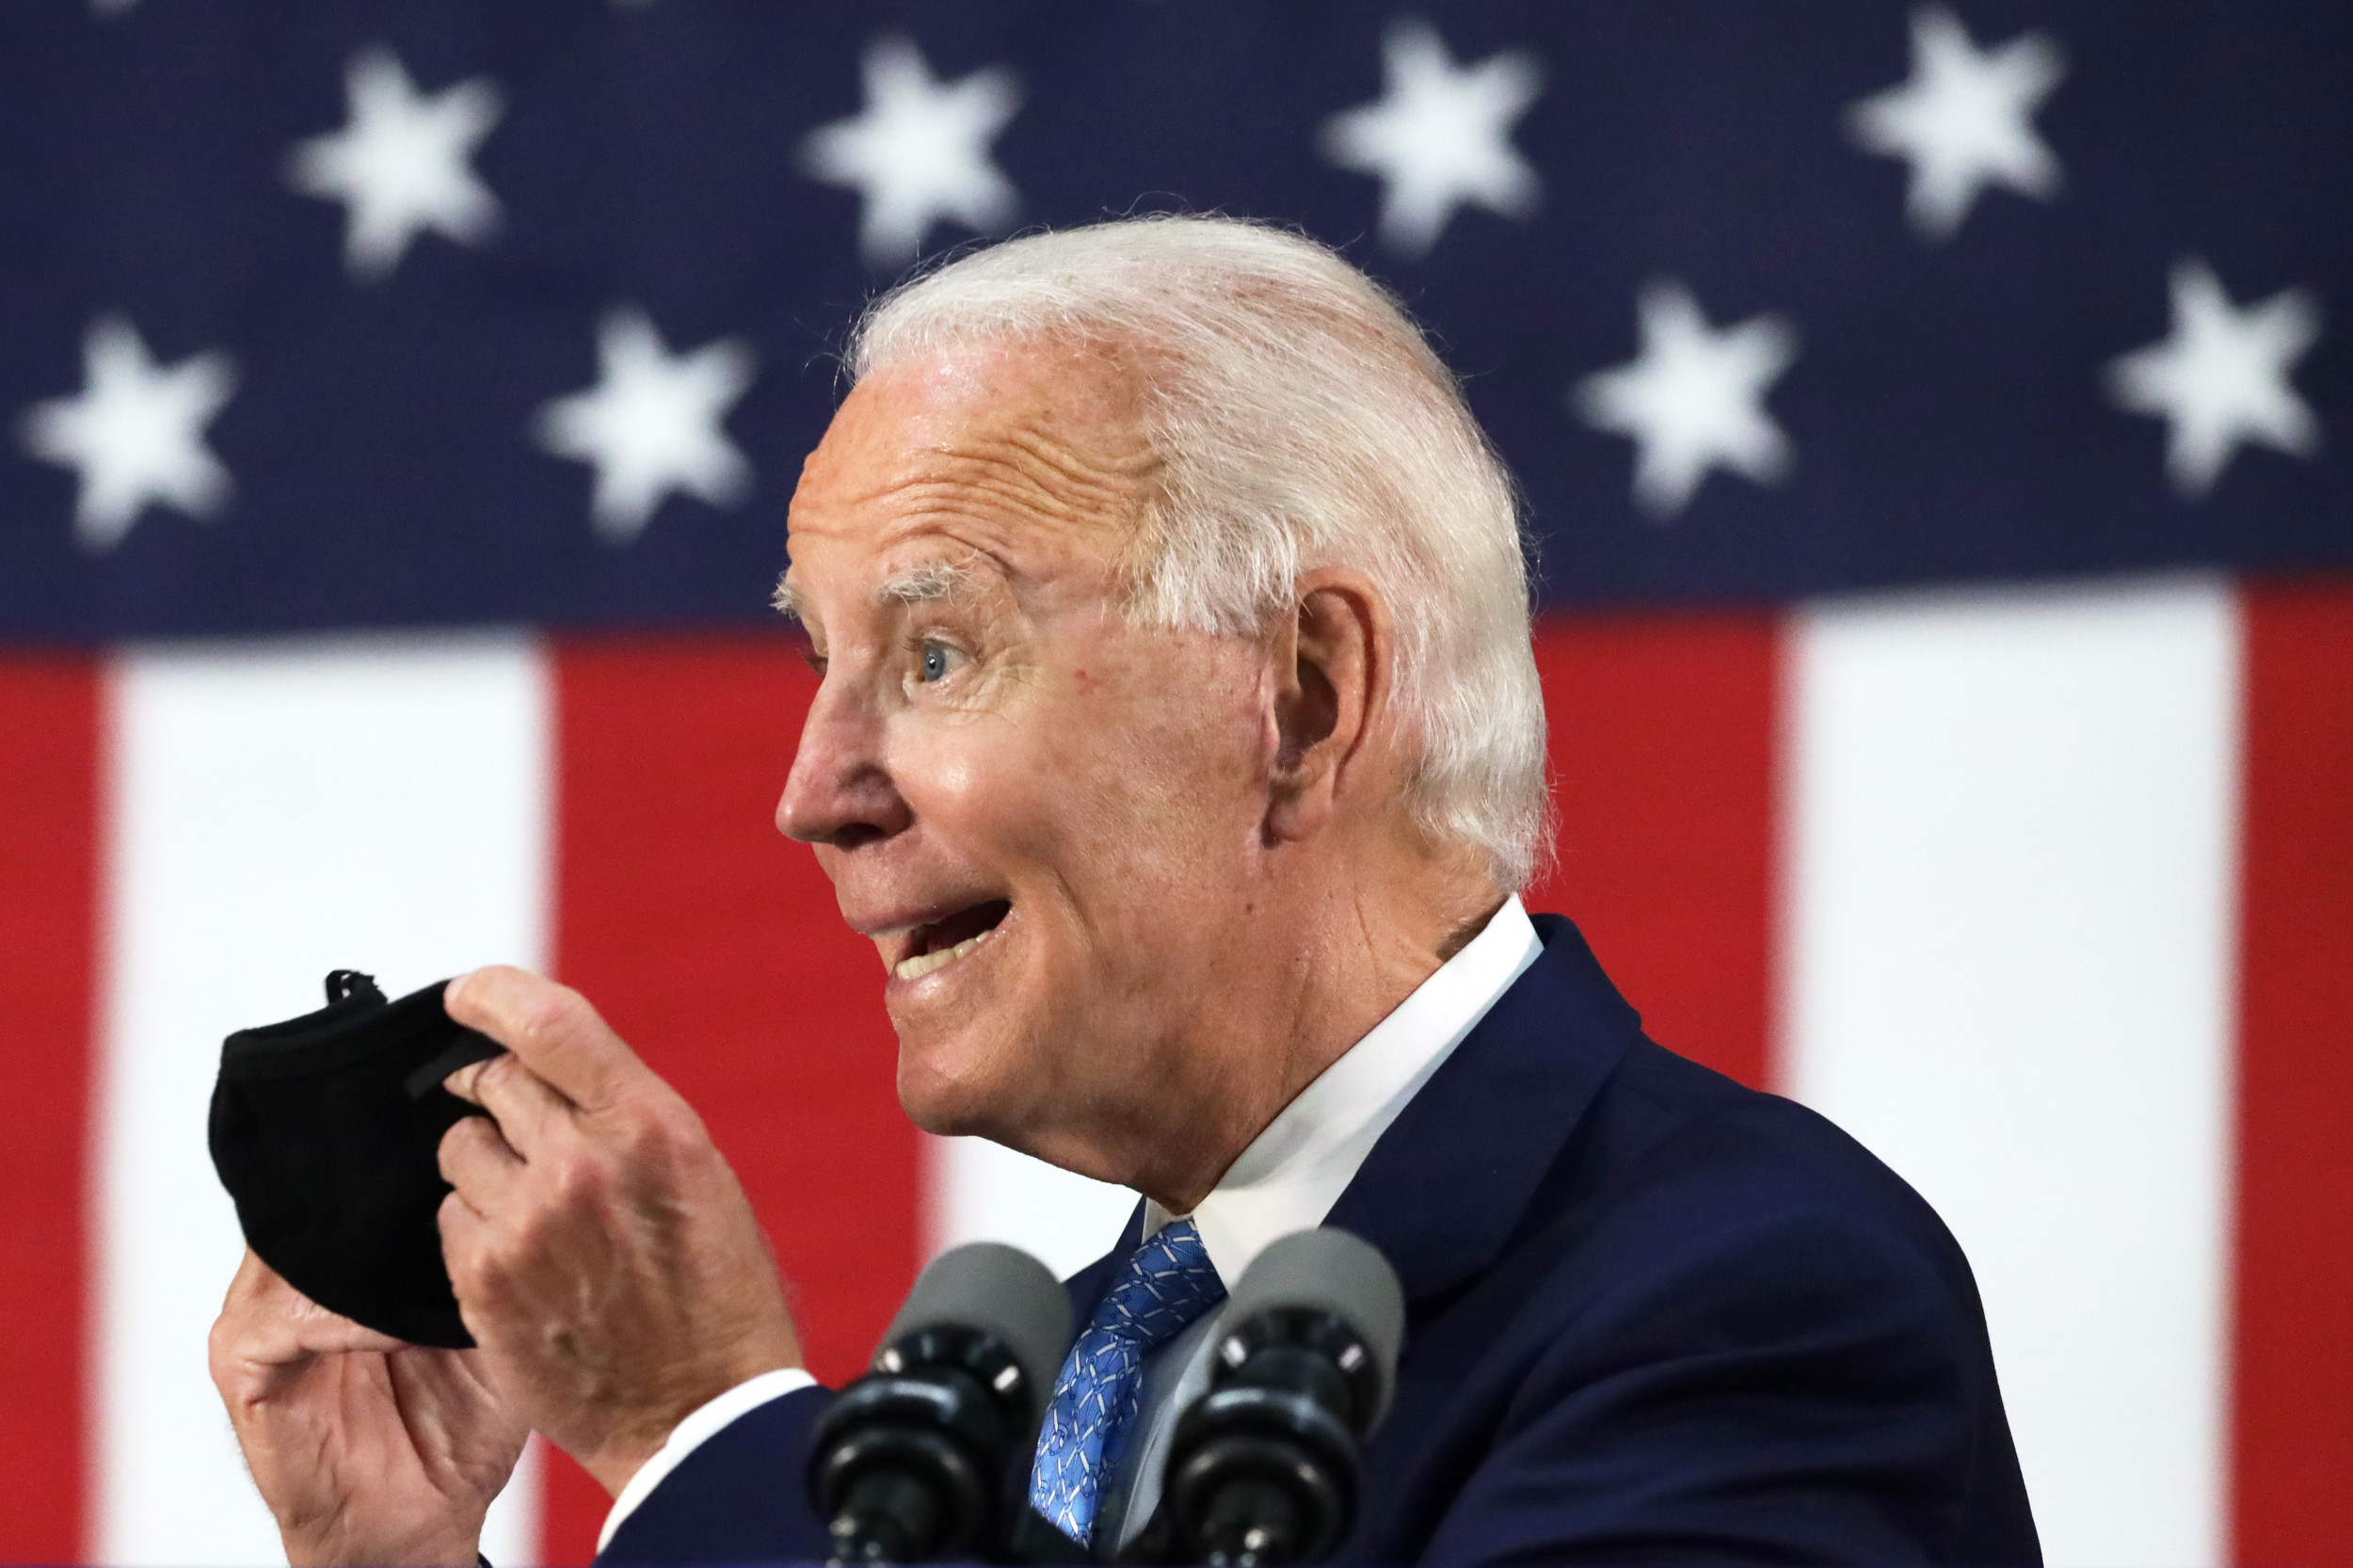 Biden Has Widened His Lead Over Trump by 9 Points Since the Coronavirus